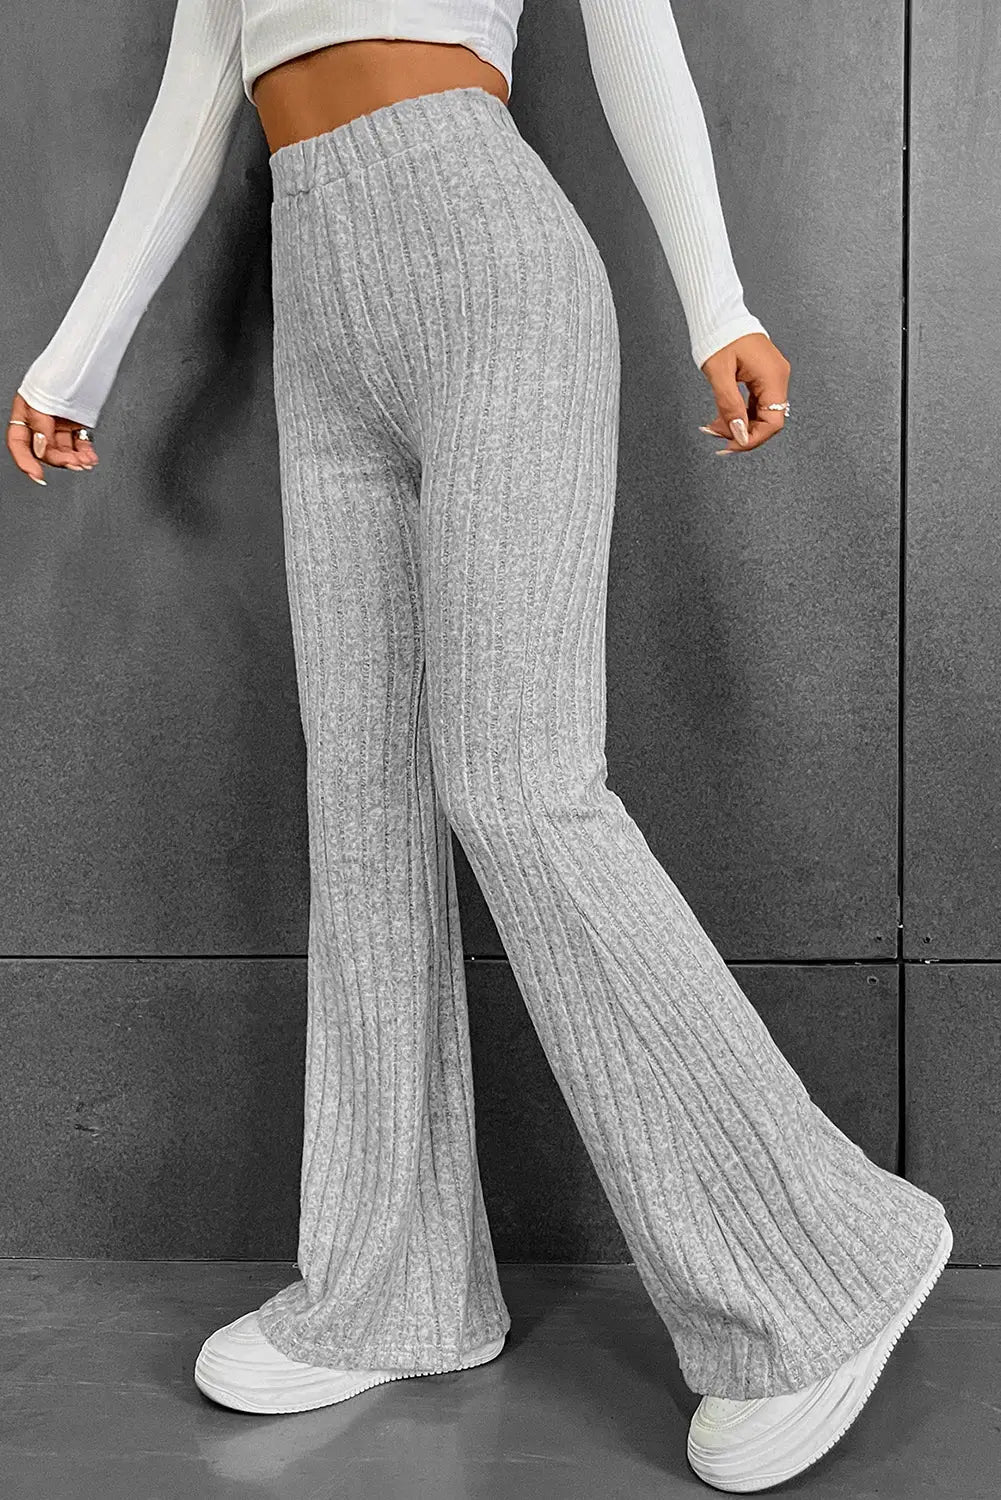 Gray solid color high waist ribbed flare pants - s / 95% polyester + 5% elastane - wide leg